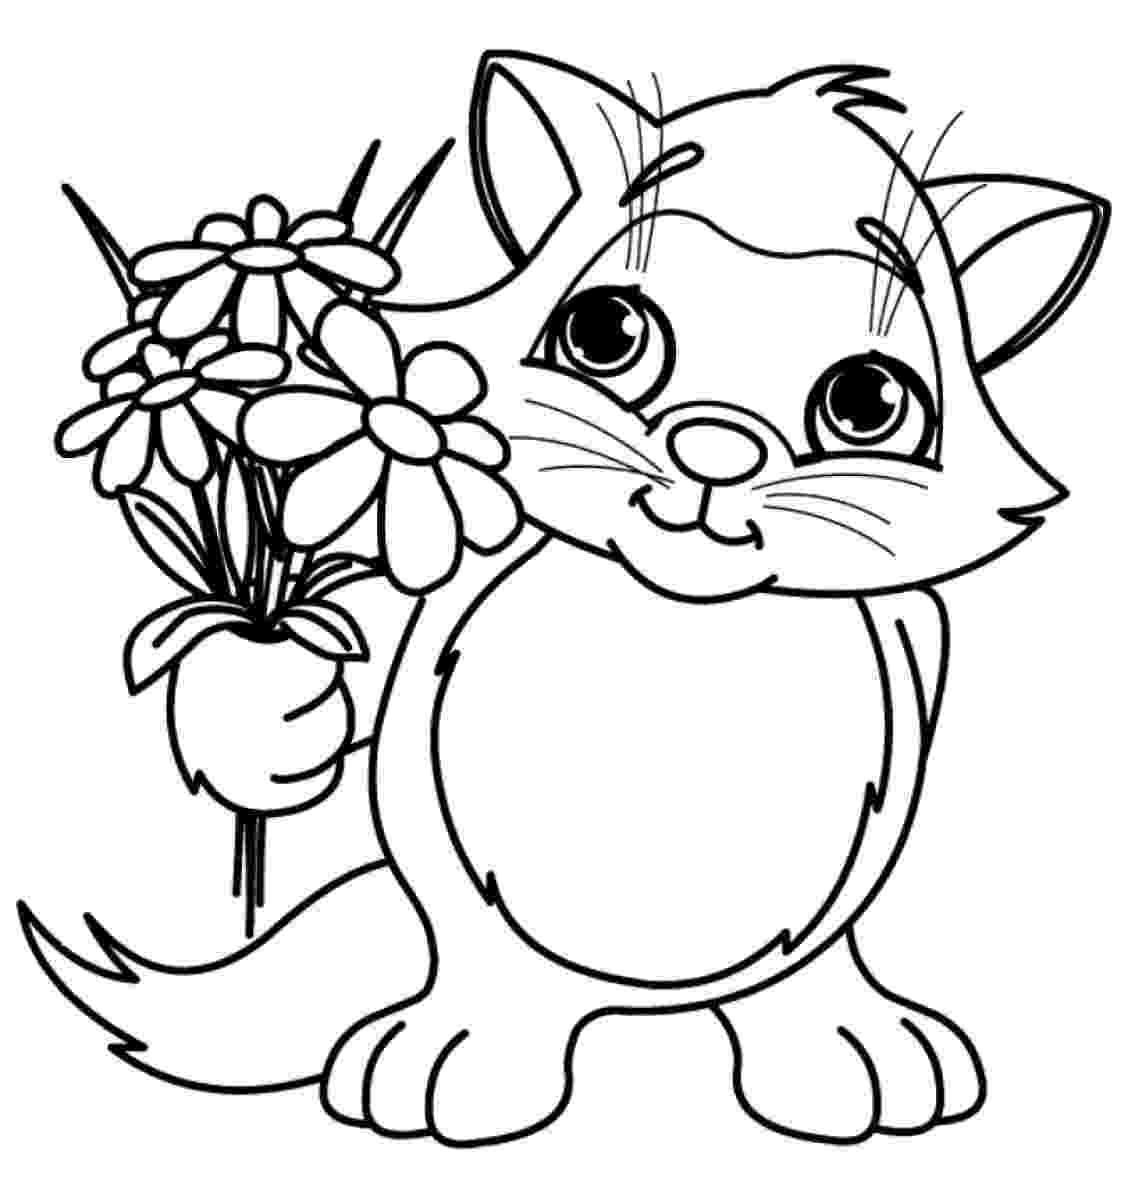 spring coloring sheets for toddlers spring flower coloring pages to download and print for free spring toddlers coloring for sheets 